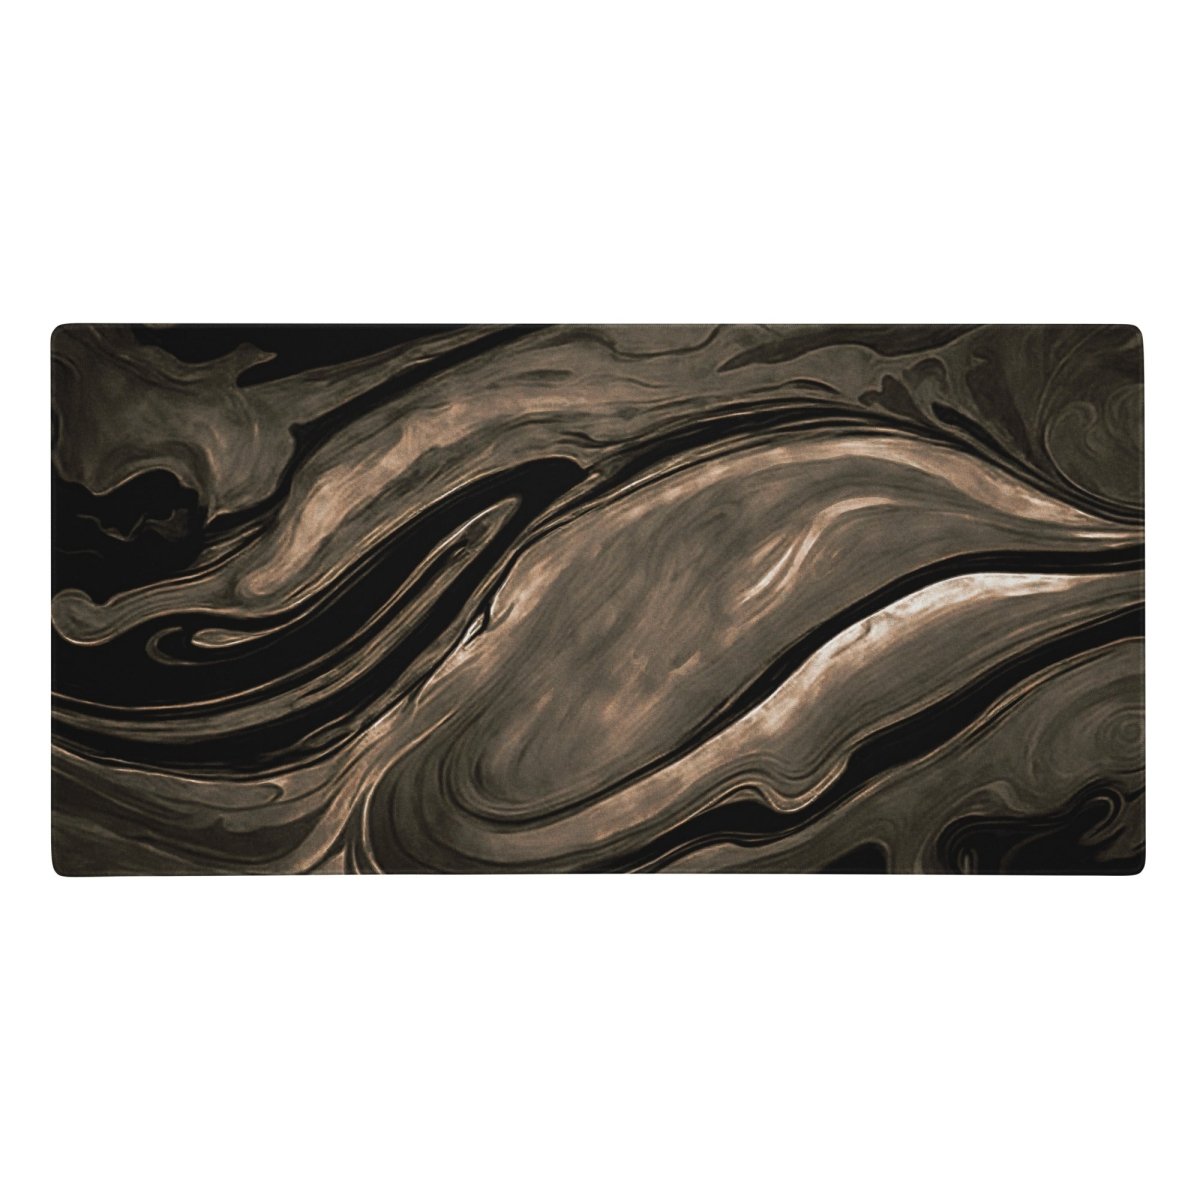 Shadow river - Gaming mouse pad - Ever colorful